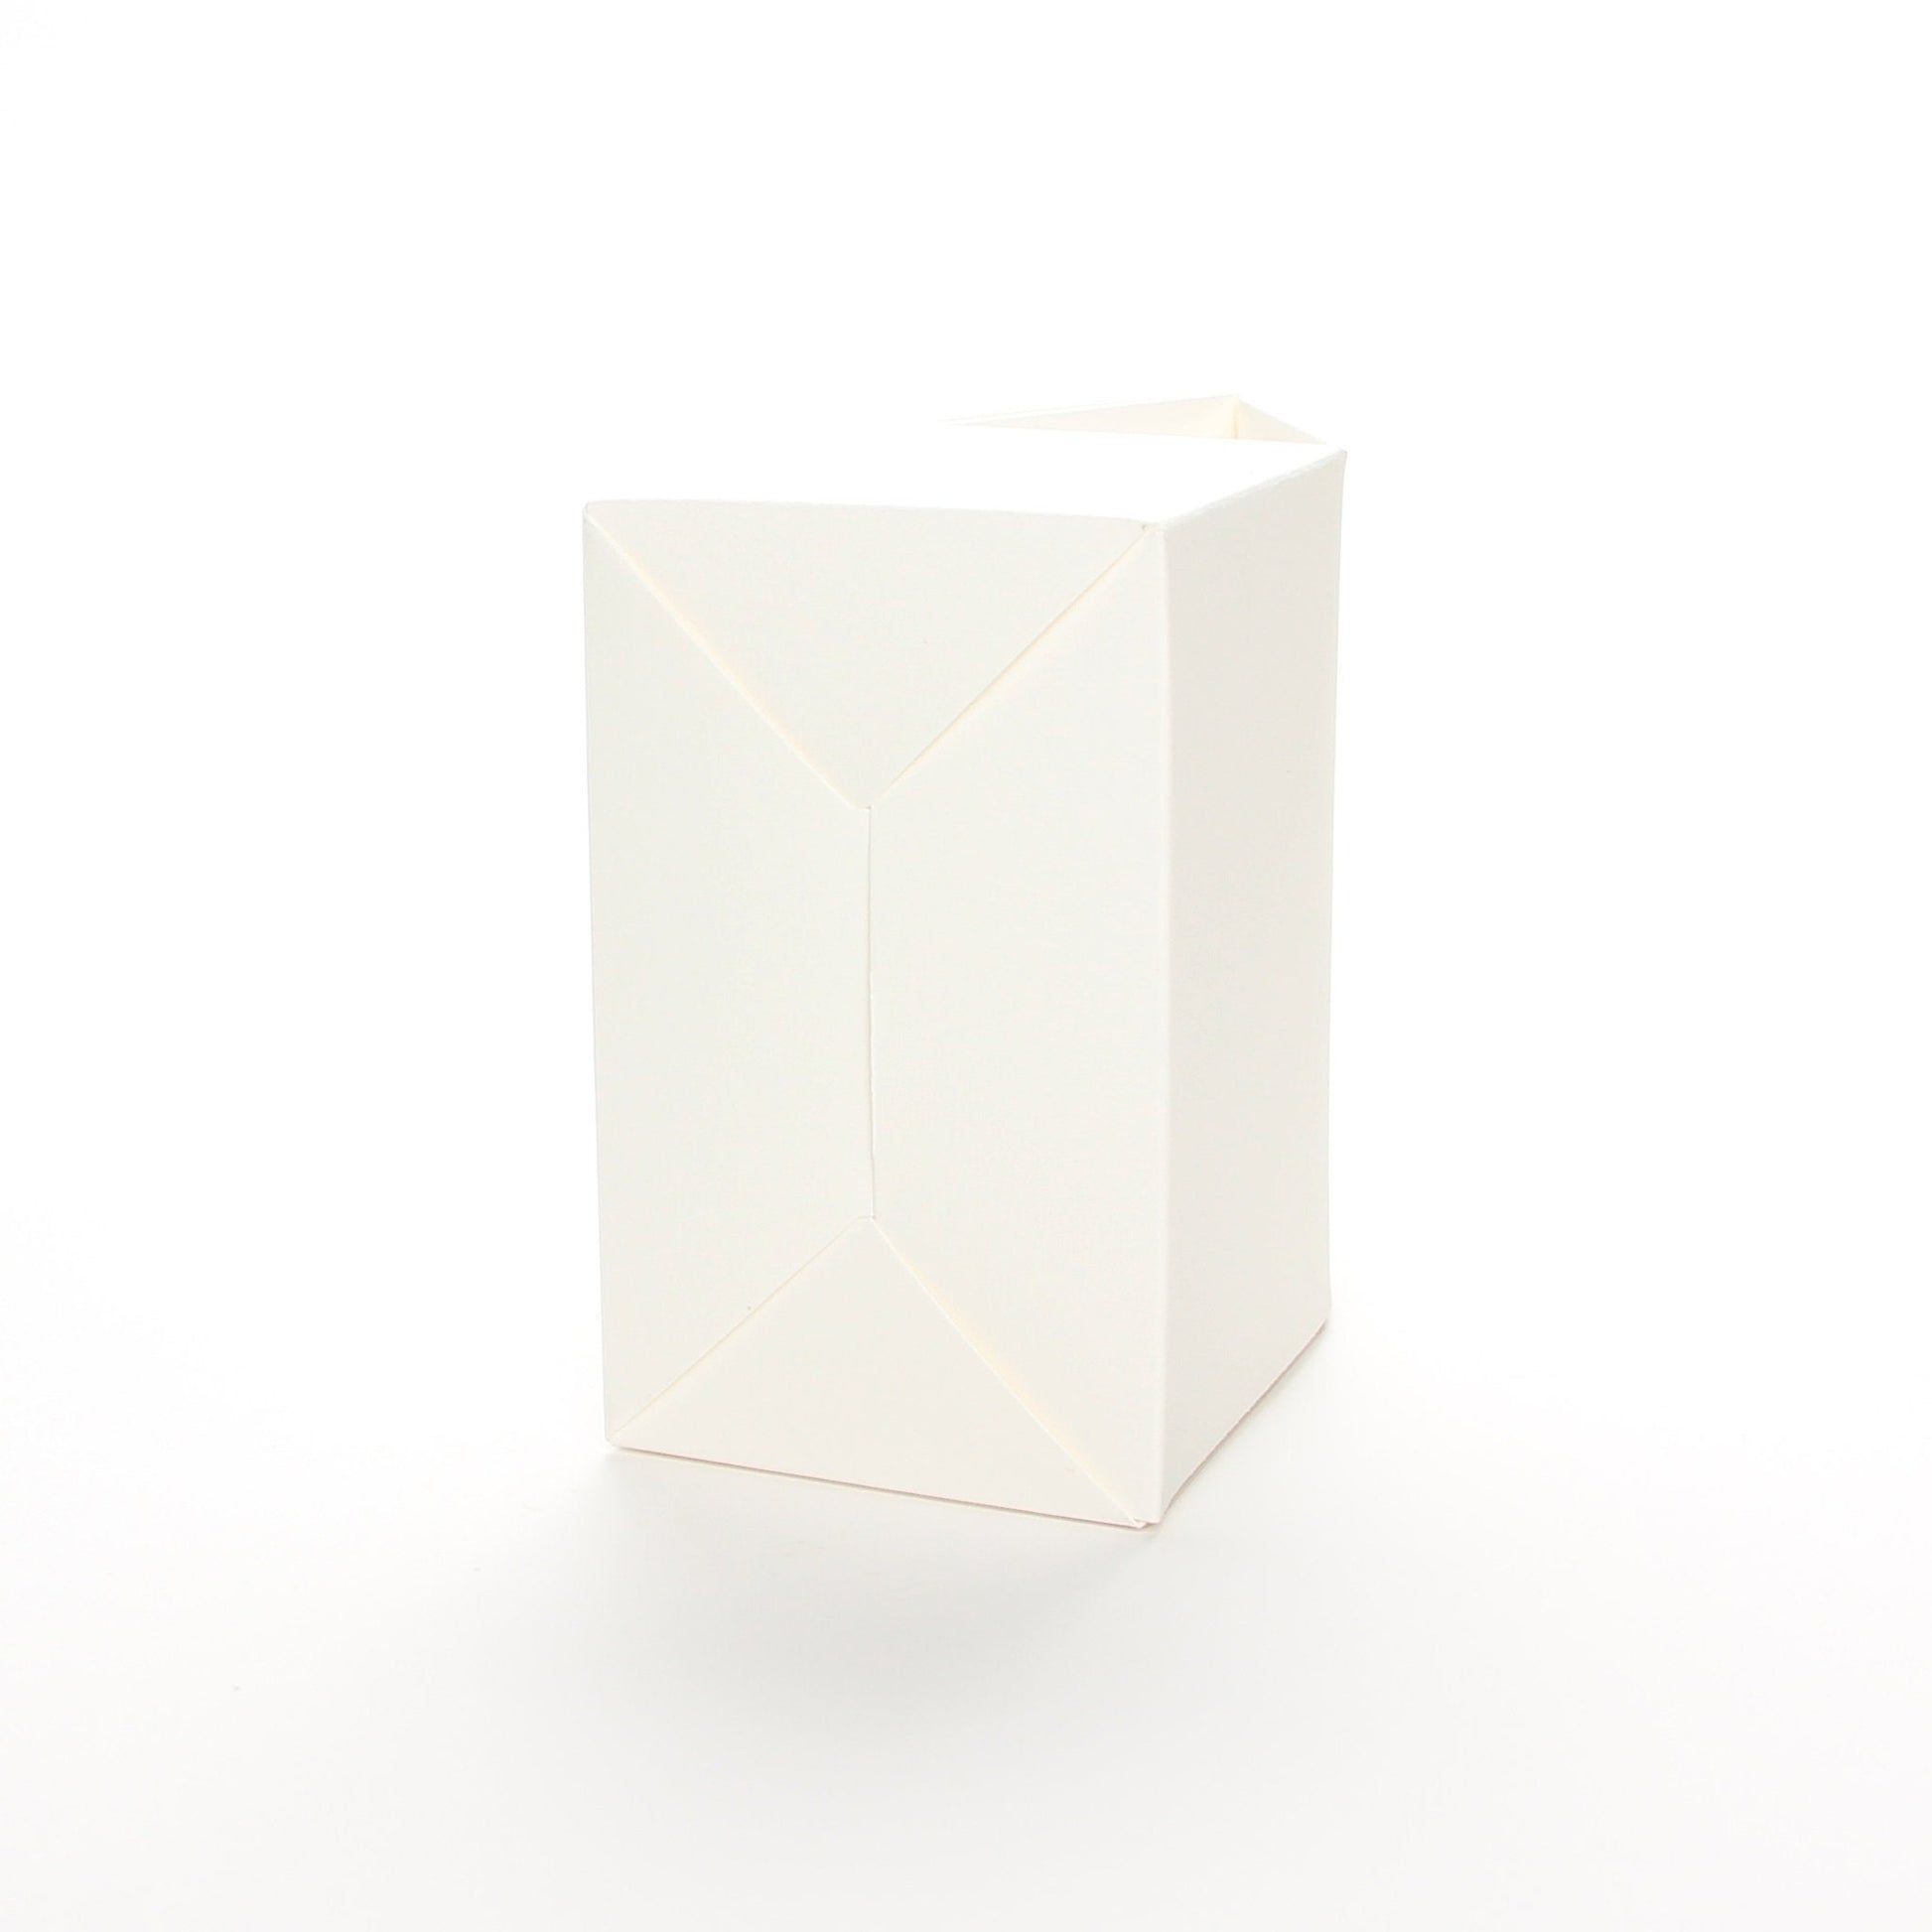 Bottom view of Lux Party’s ivory favor box on a white background.